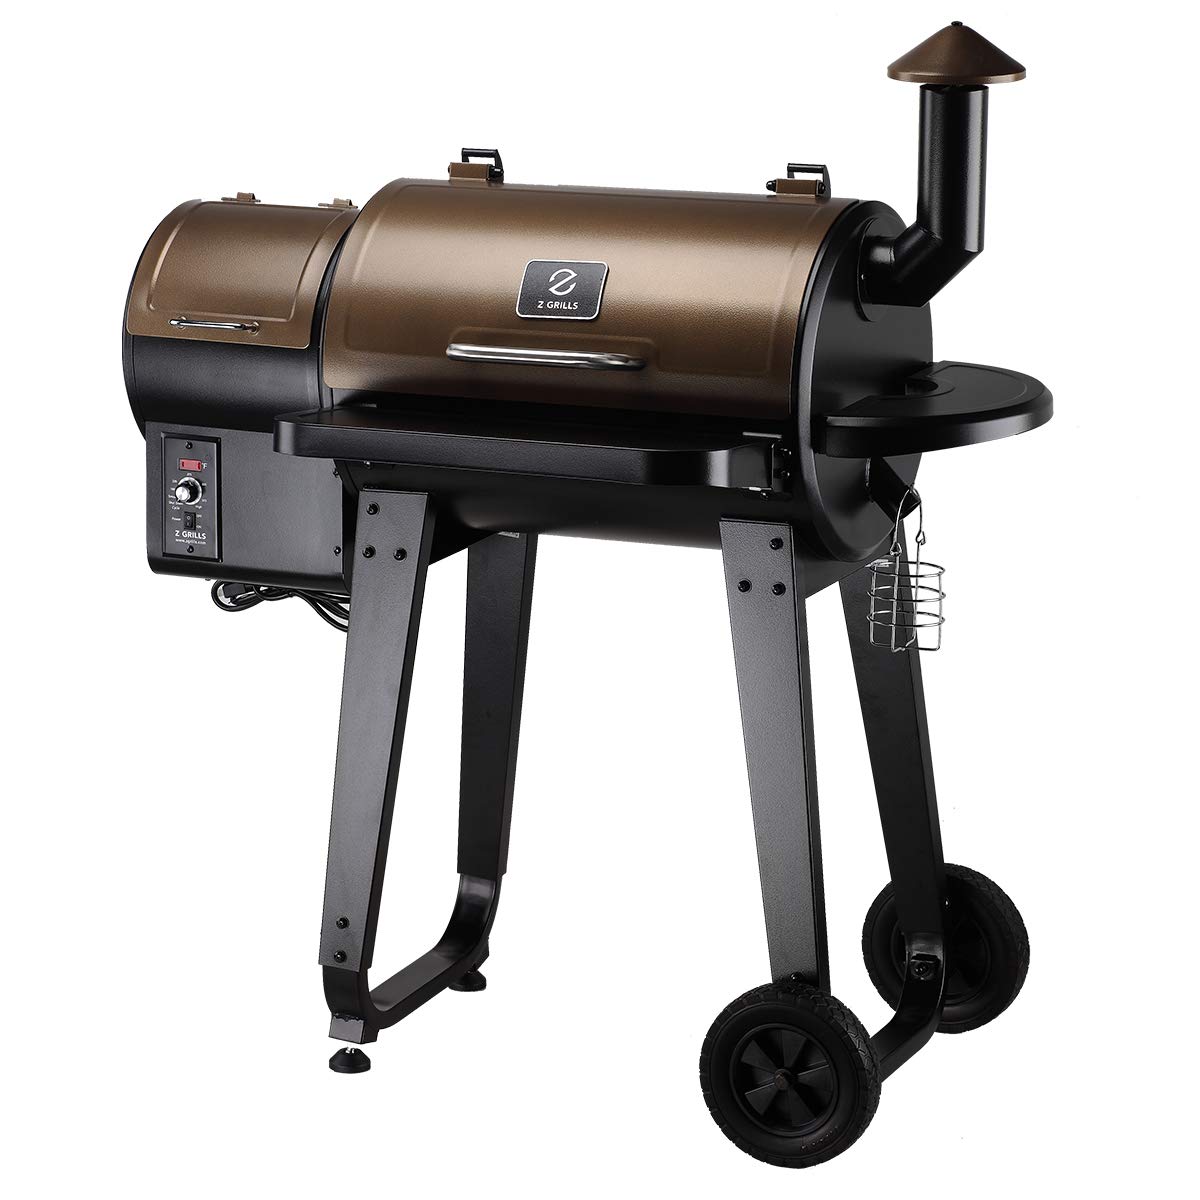 Z Grills ZPG-450A Upgrade Model Wood Pellet Grill & Smoker, 8 in 1 BBQ Grill Auto Temperature Control, 450 sq Inch Deal, Bronze & Black Cover Included - image 1 of 11